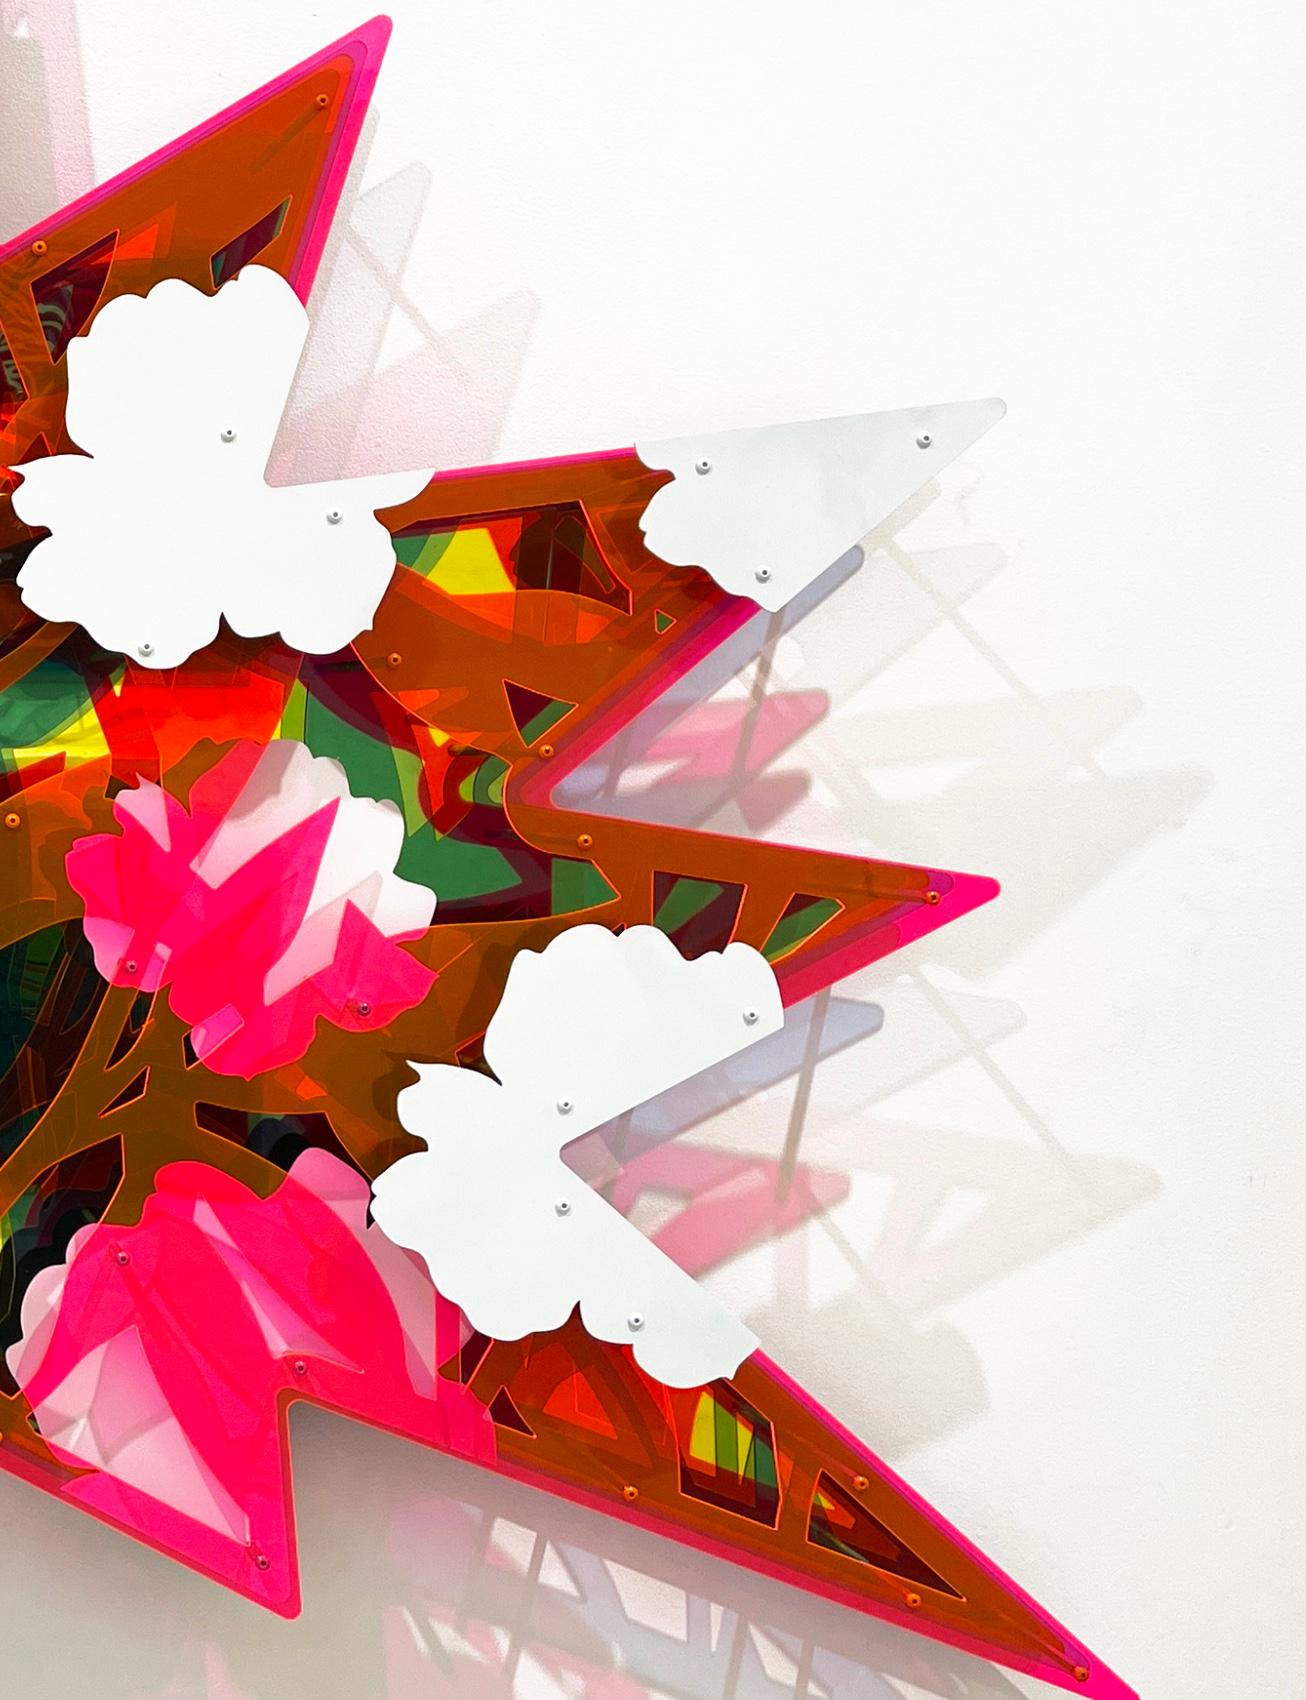 Floral Abstract POW Neon Pink on Blue - Pop Art Sculpture by Michael Kalish